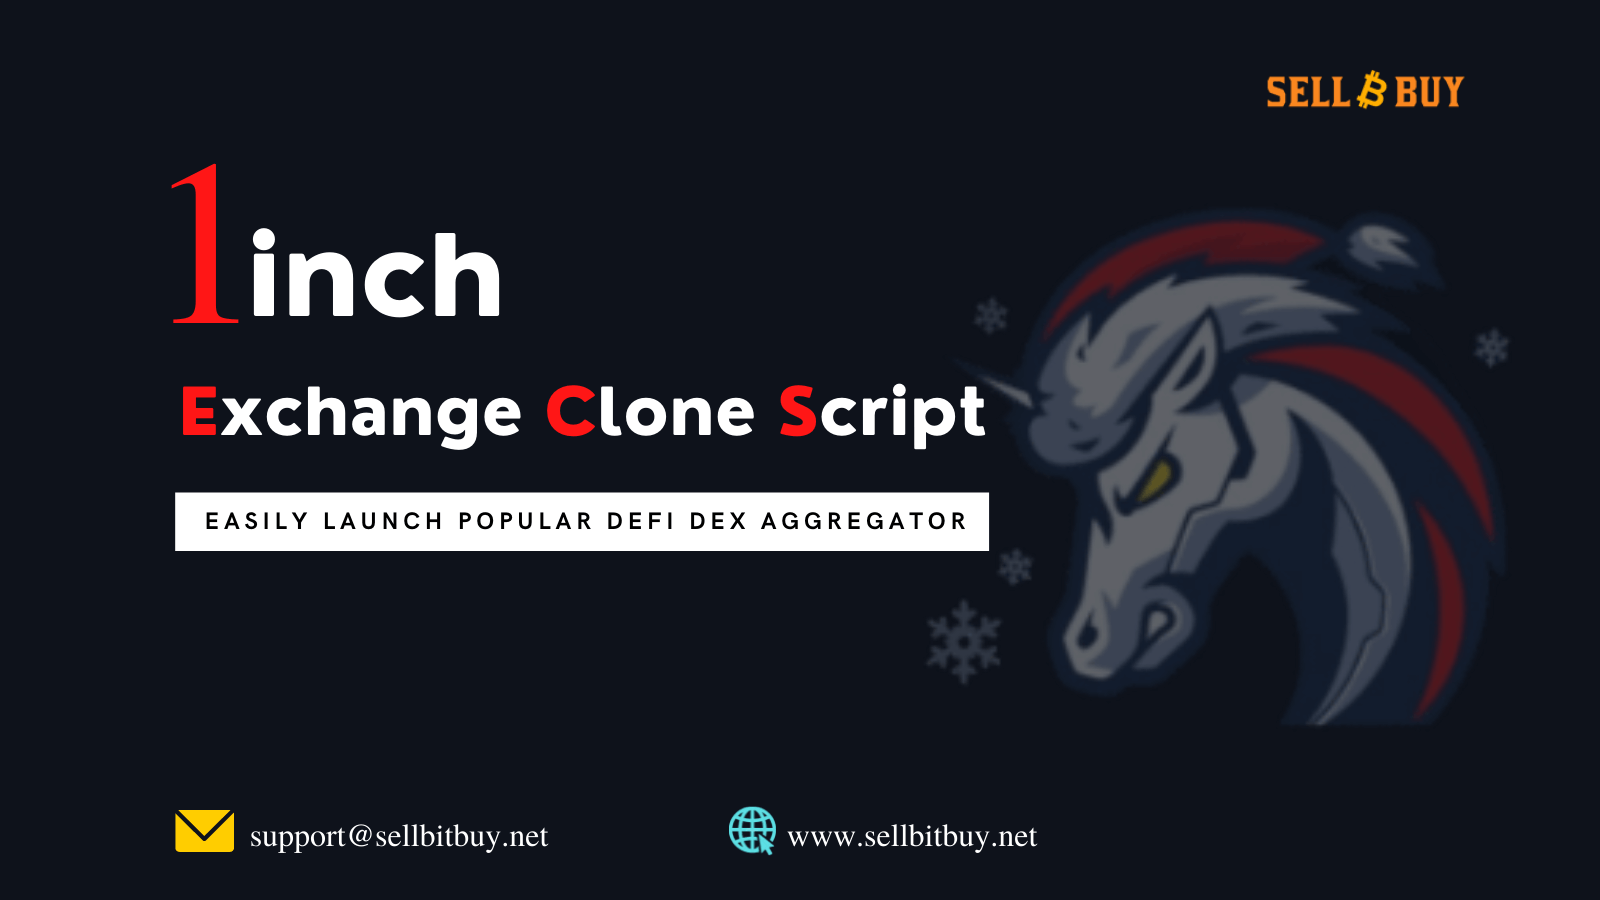 1inch Exchange Clone Script - A Solution To Create DEX Aggregator Like 1inch